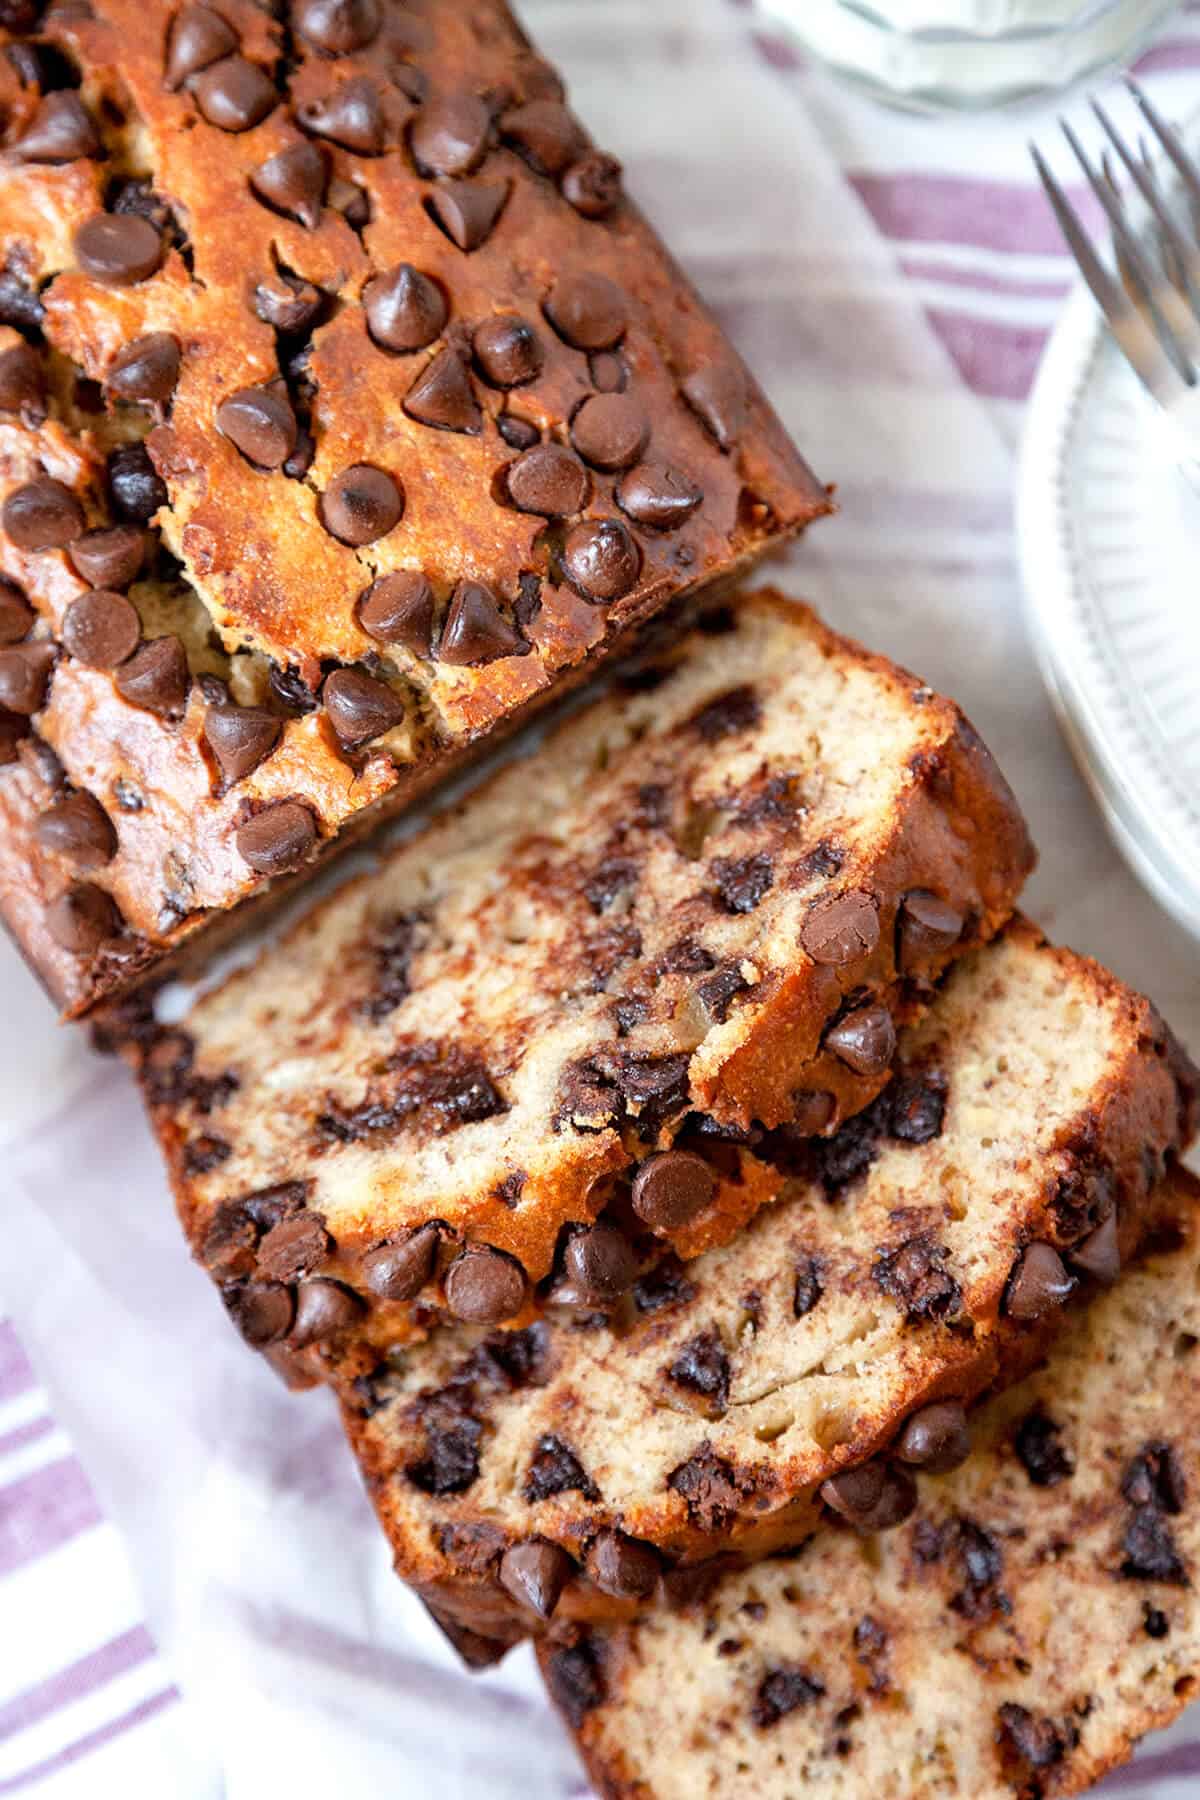 A color photo of a partially sliced loaf of chocolate chip banana bread.